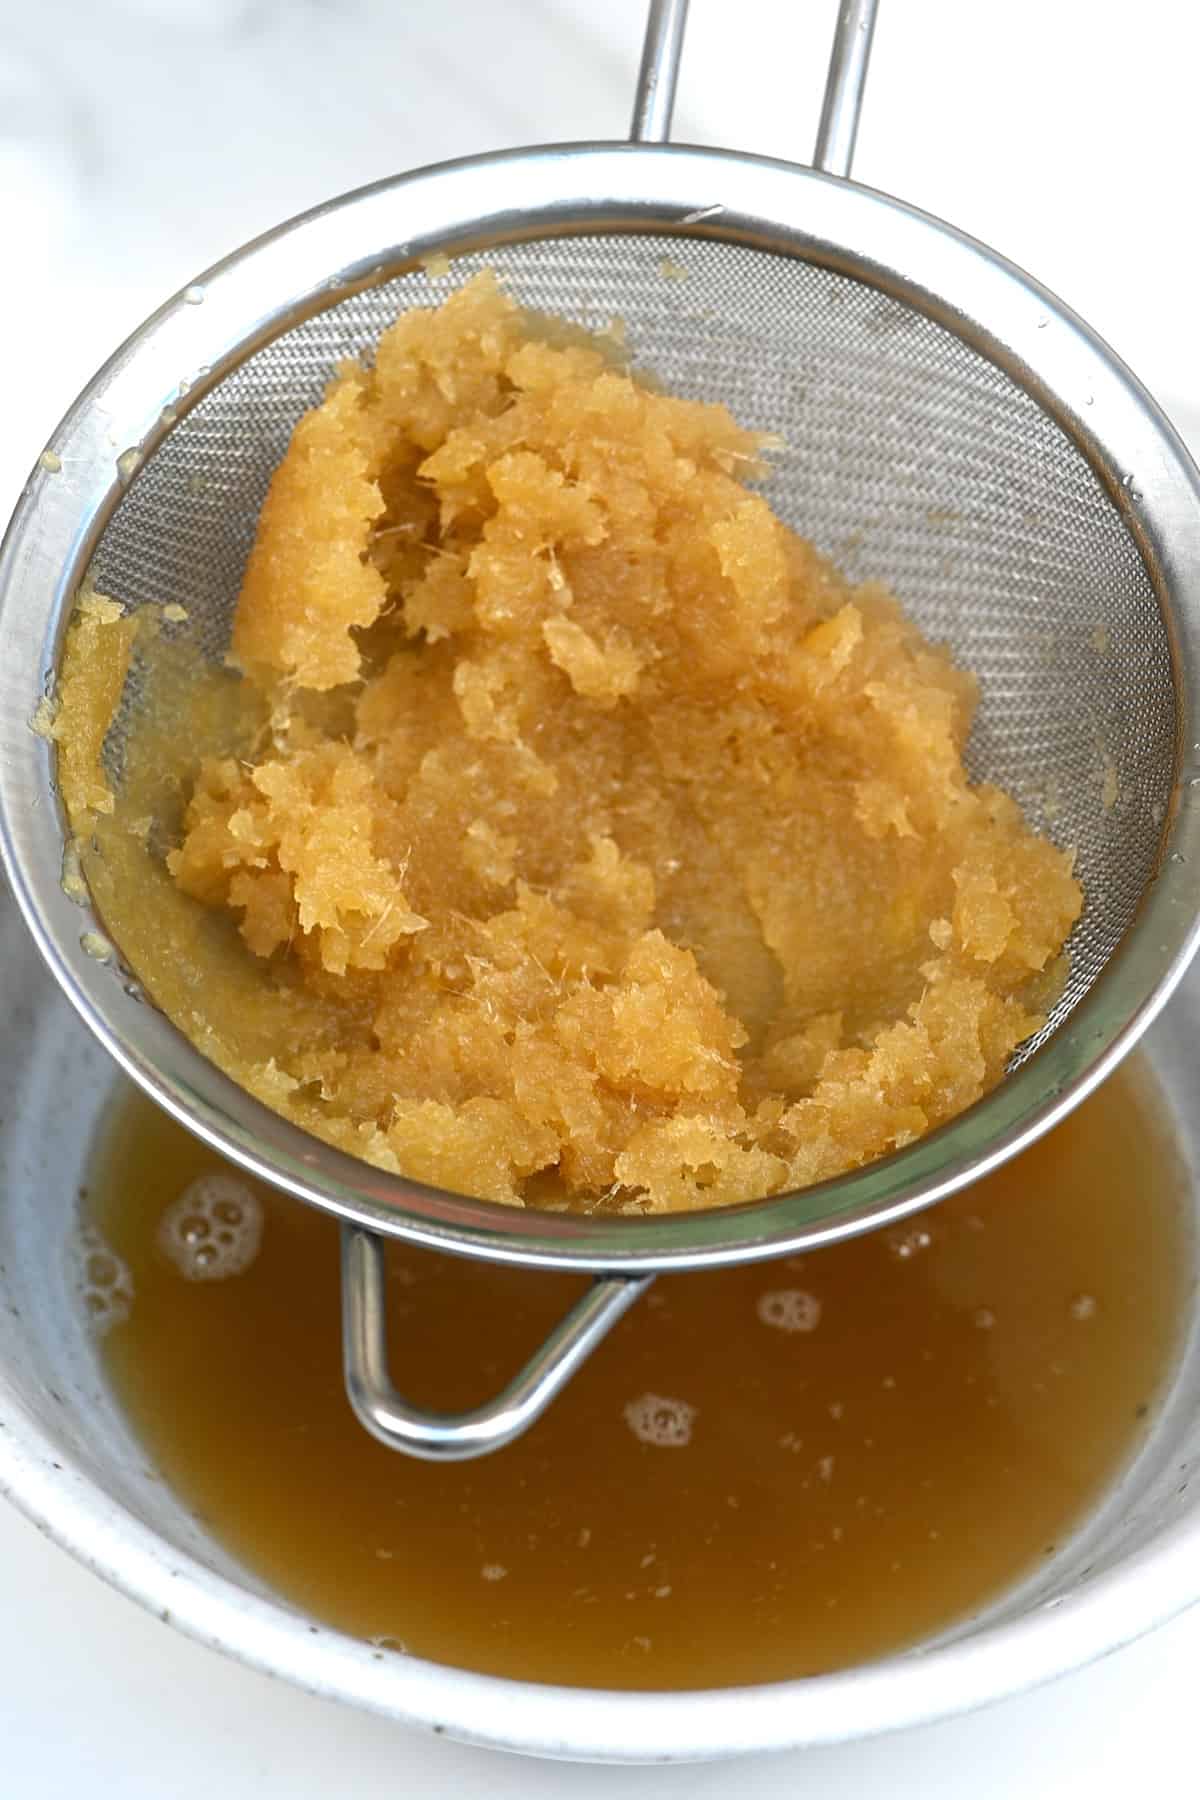 Sieving ginger syrup